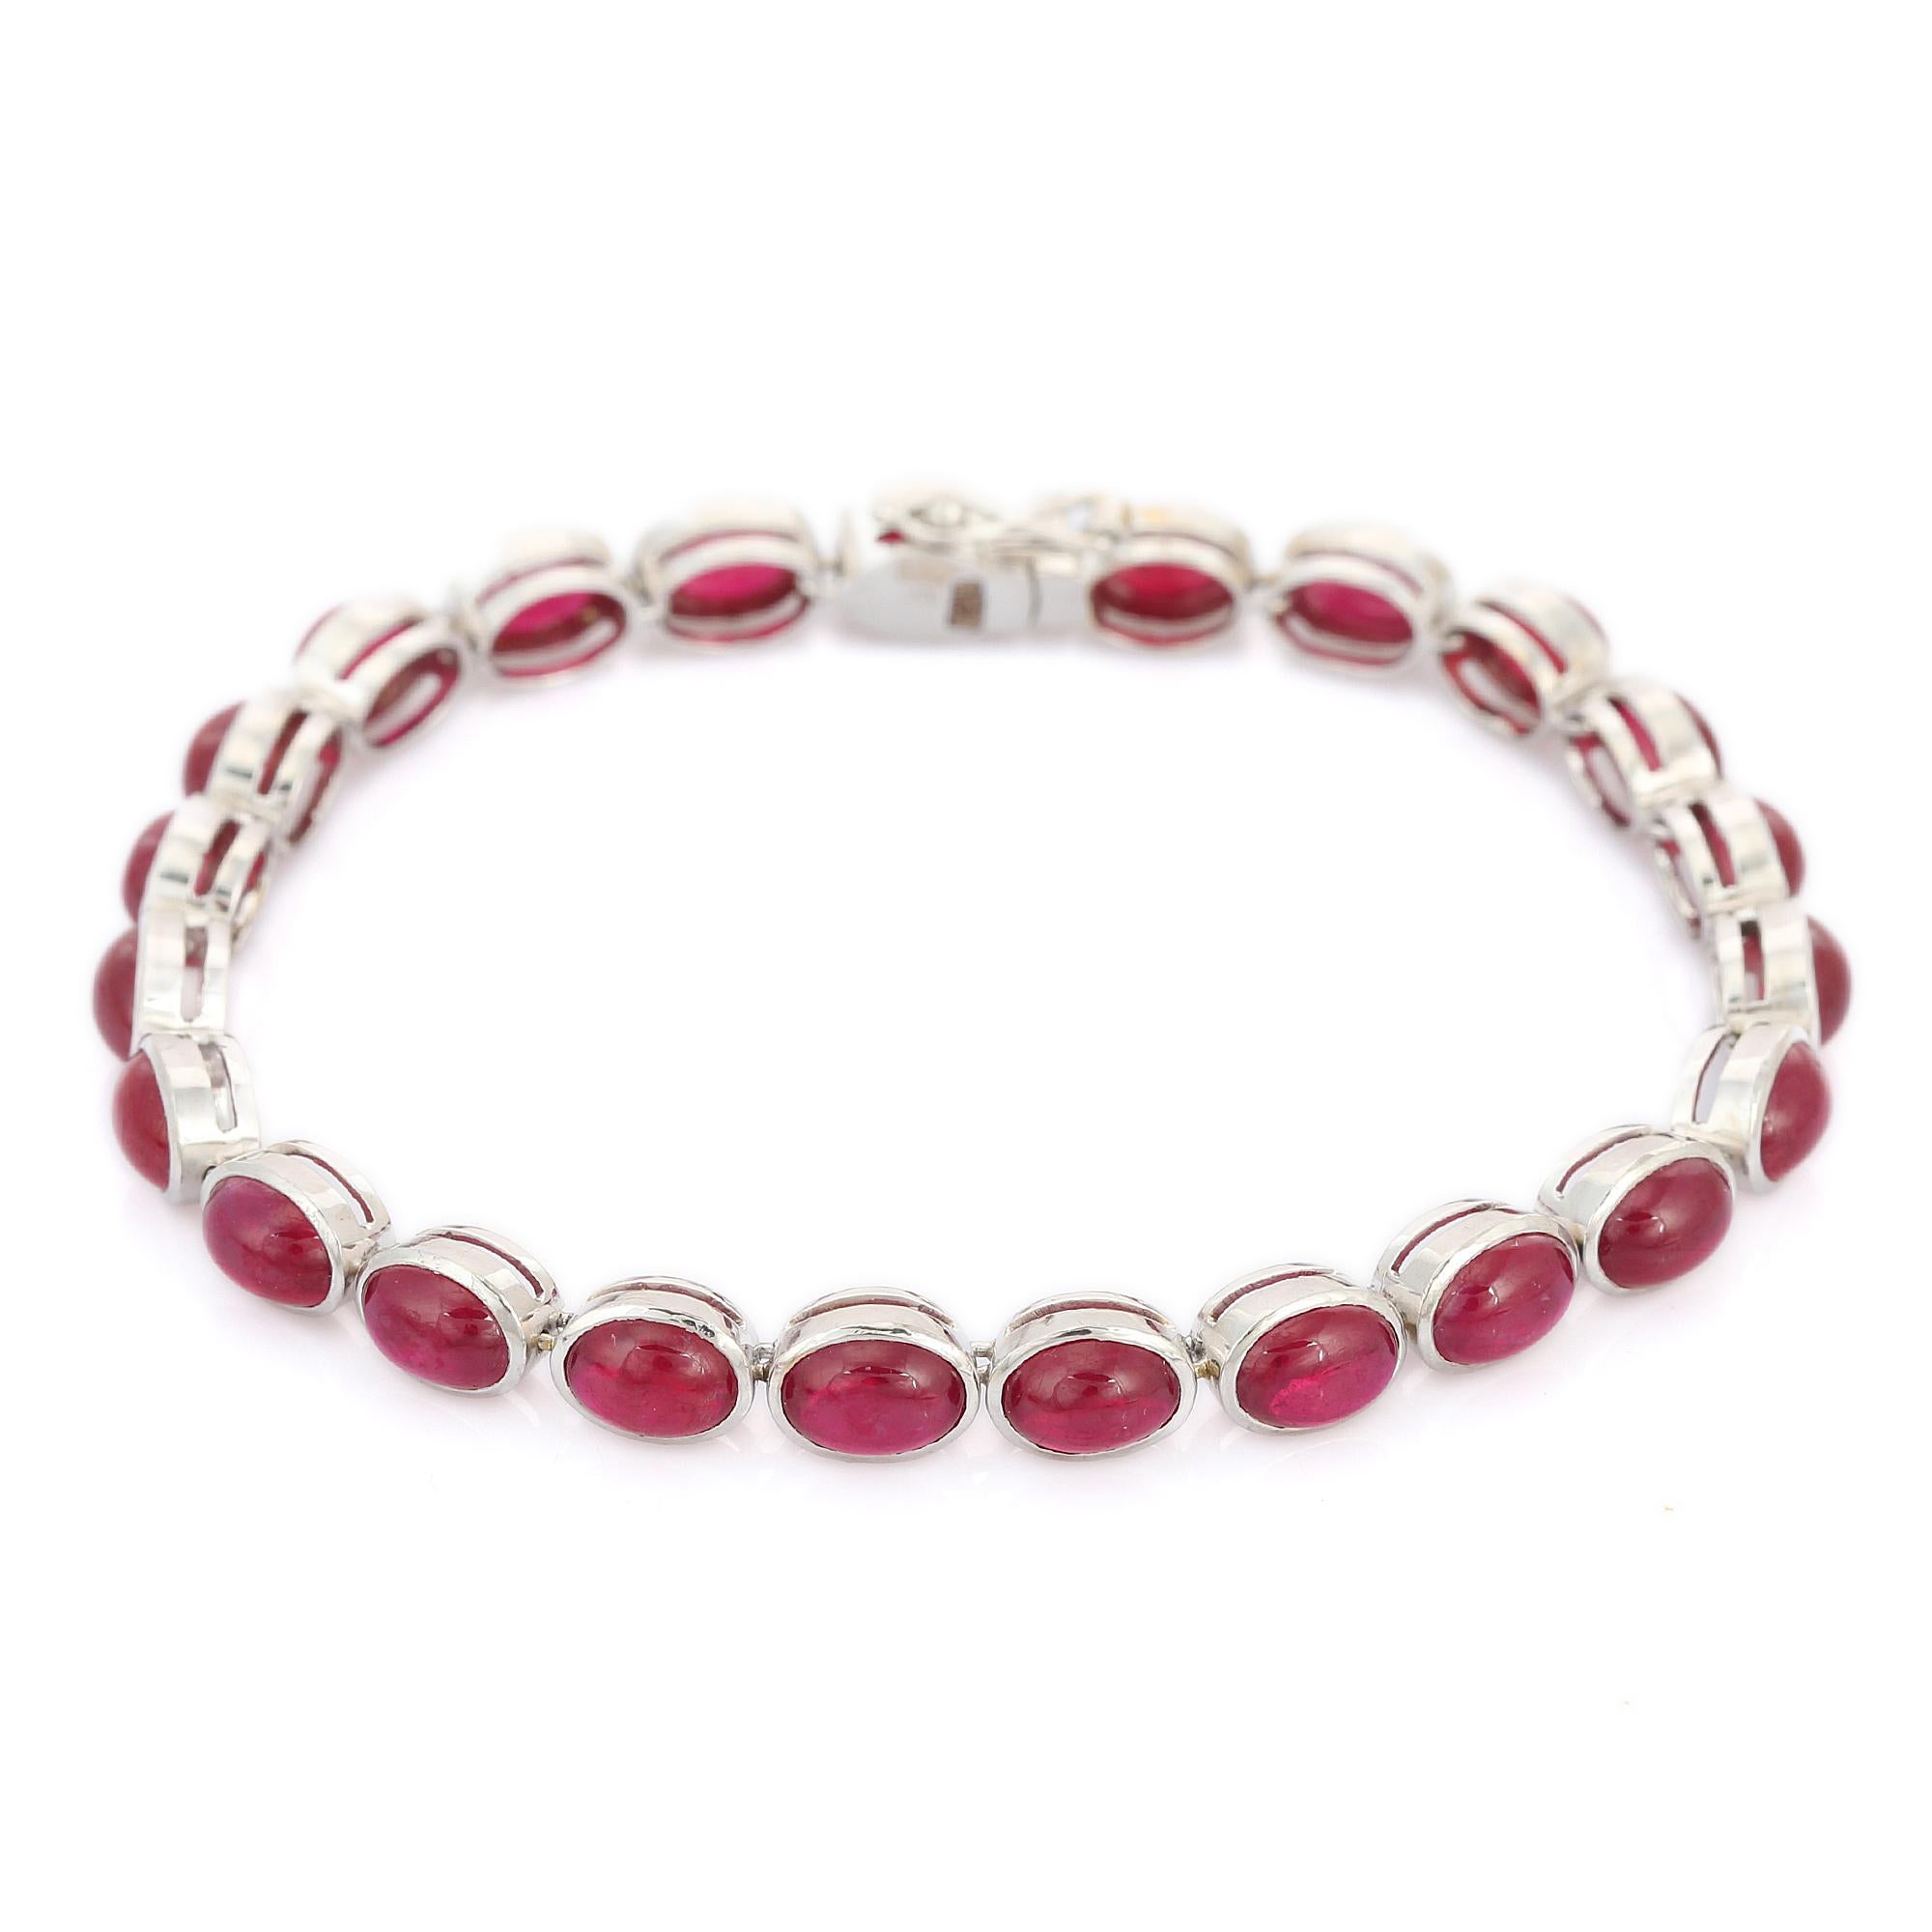 Ruby bracelet in 18K Gold. It has a perfect oval cut gemstone studded to make you stand out on any occasion or an event. 
A tennis bracelet is an essential piece of jewelry when it comes to your wedding day. The sleek and elegant style complements